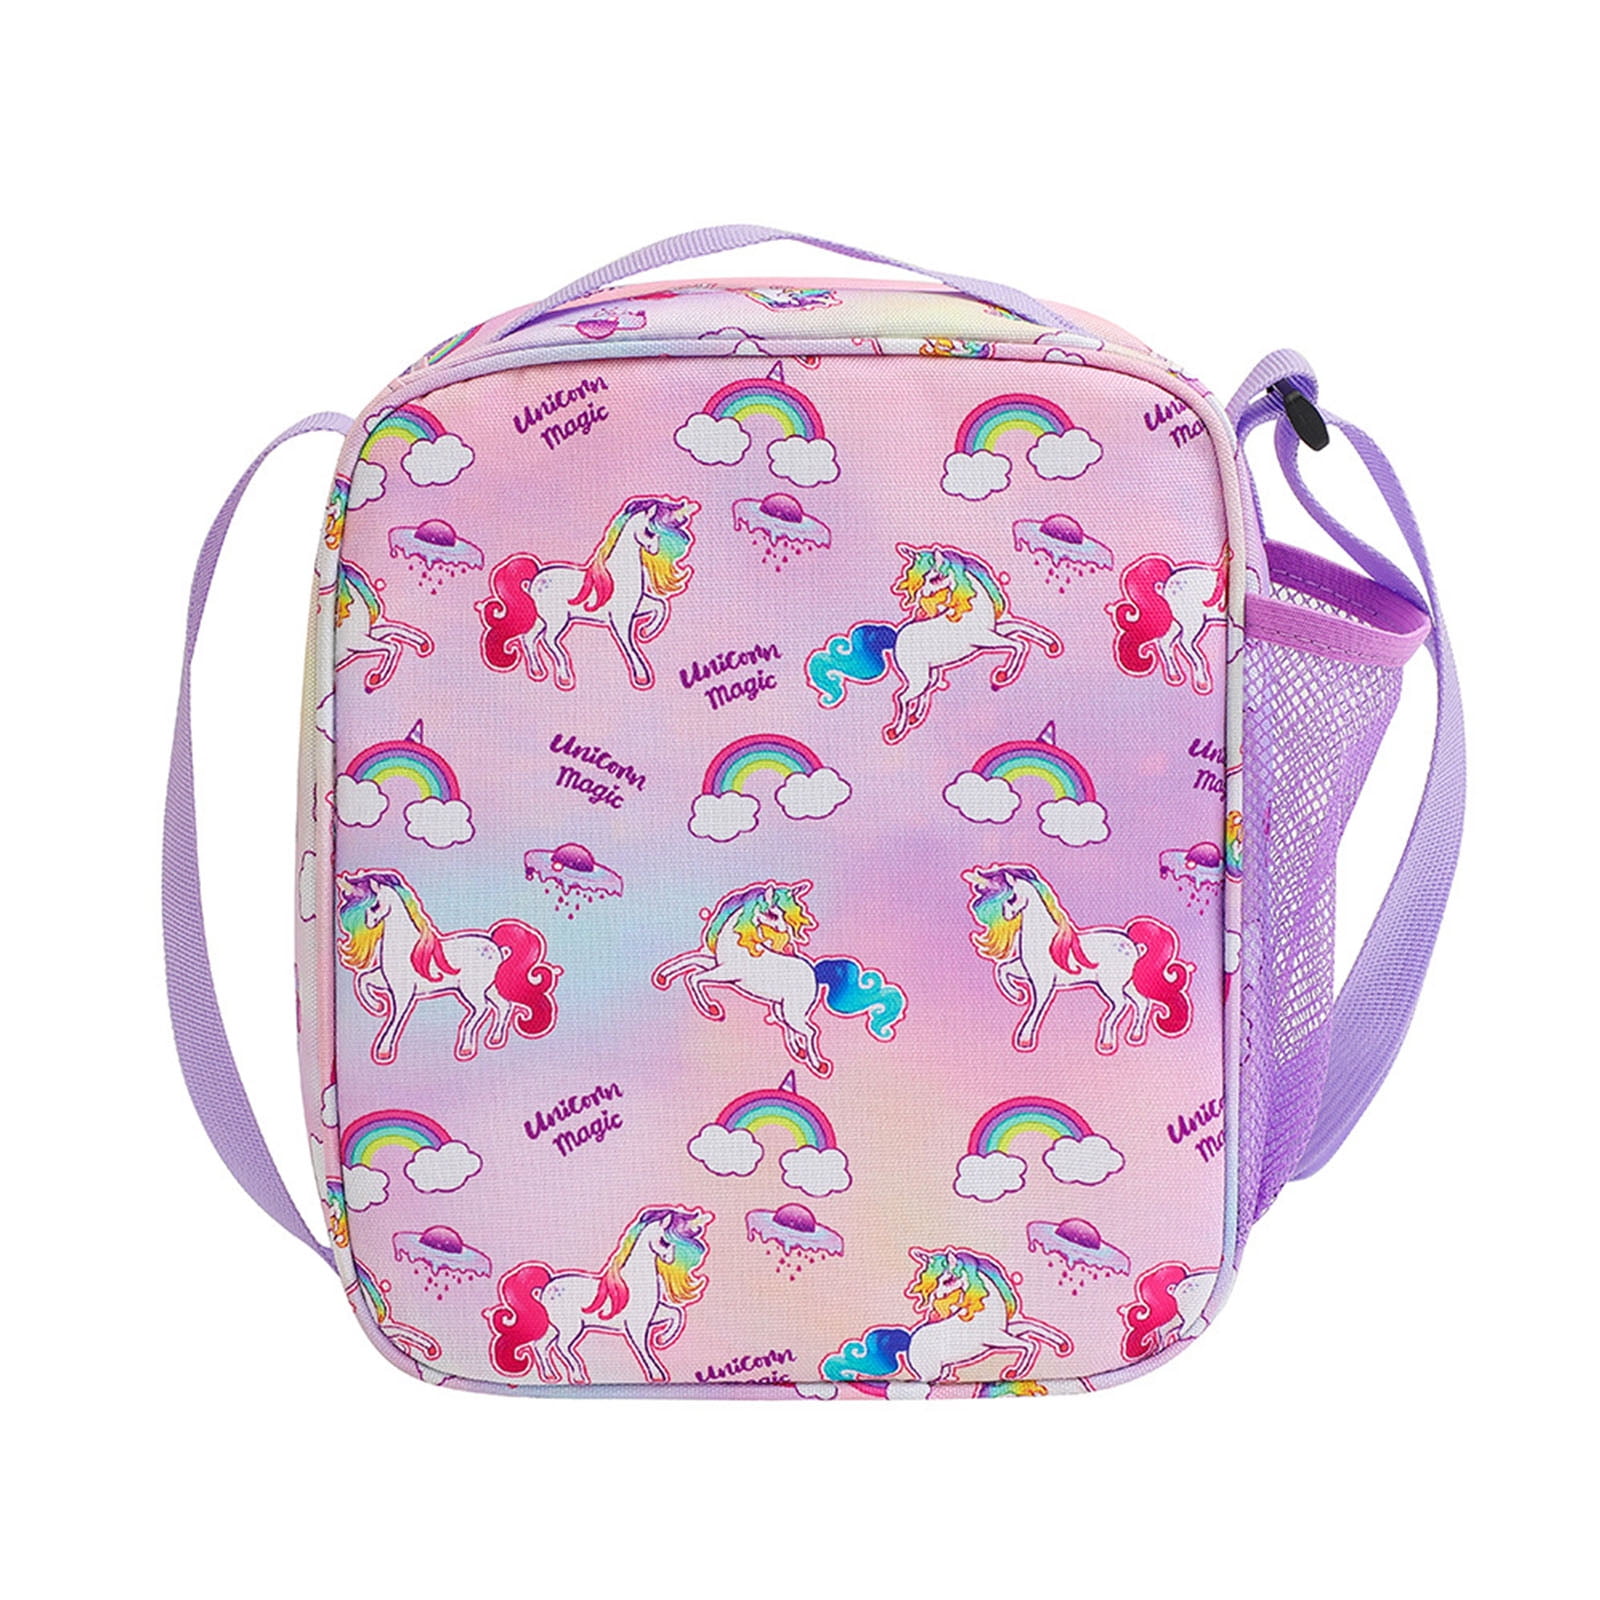 JOY2B Kids Lunch Bag - Insulated Unicorn Lunch Bag Kids with Water Bottle  Holder - Reusable Snack Ba…See more JOY2B Kids Lunch Bag - Insulated  Unicorn